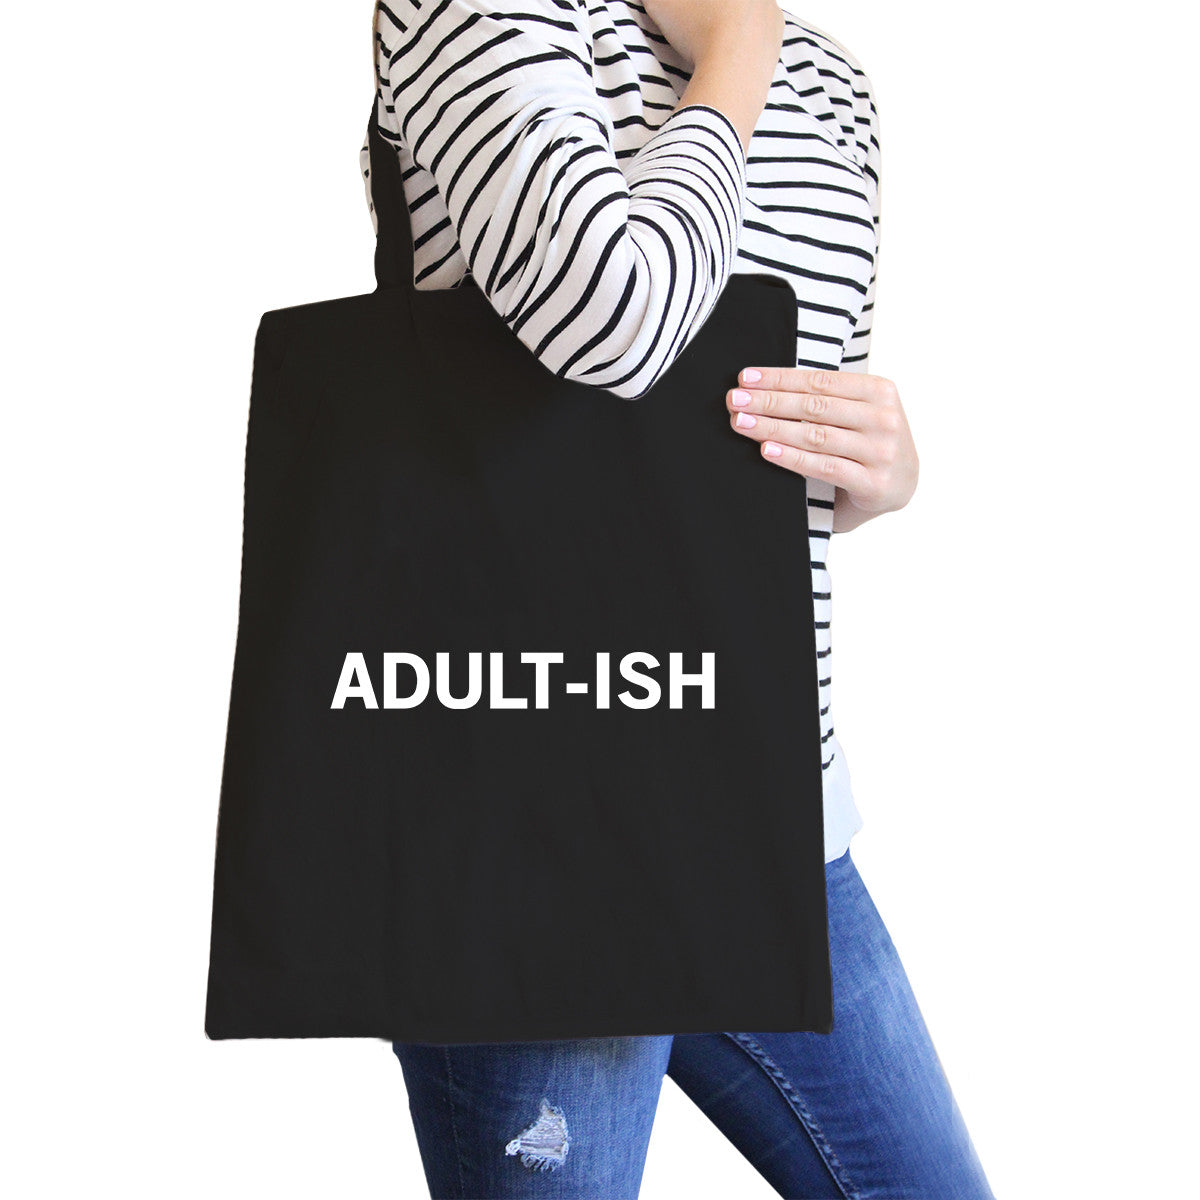 Adult-ish Black Canvas Bag Trendy Varsity Tote For College Stude